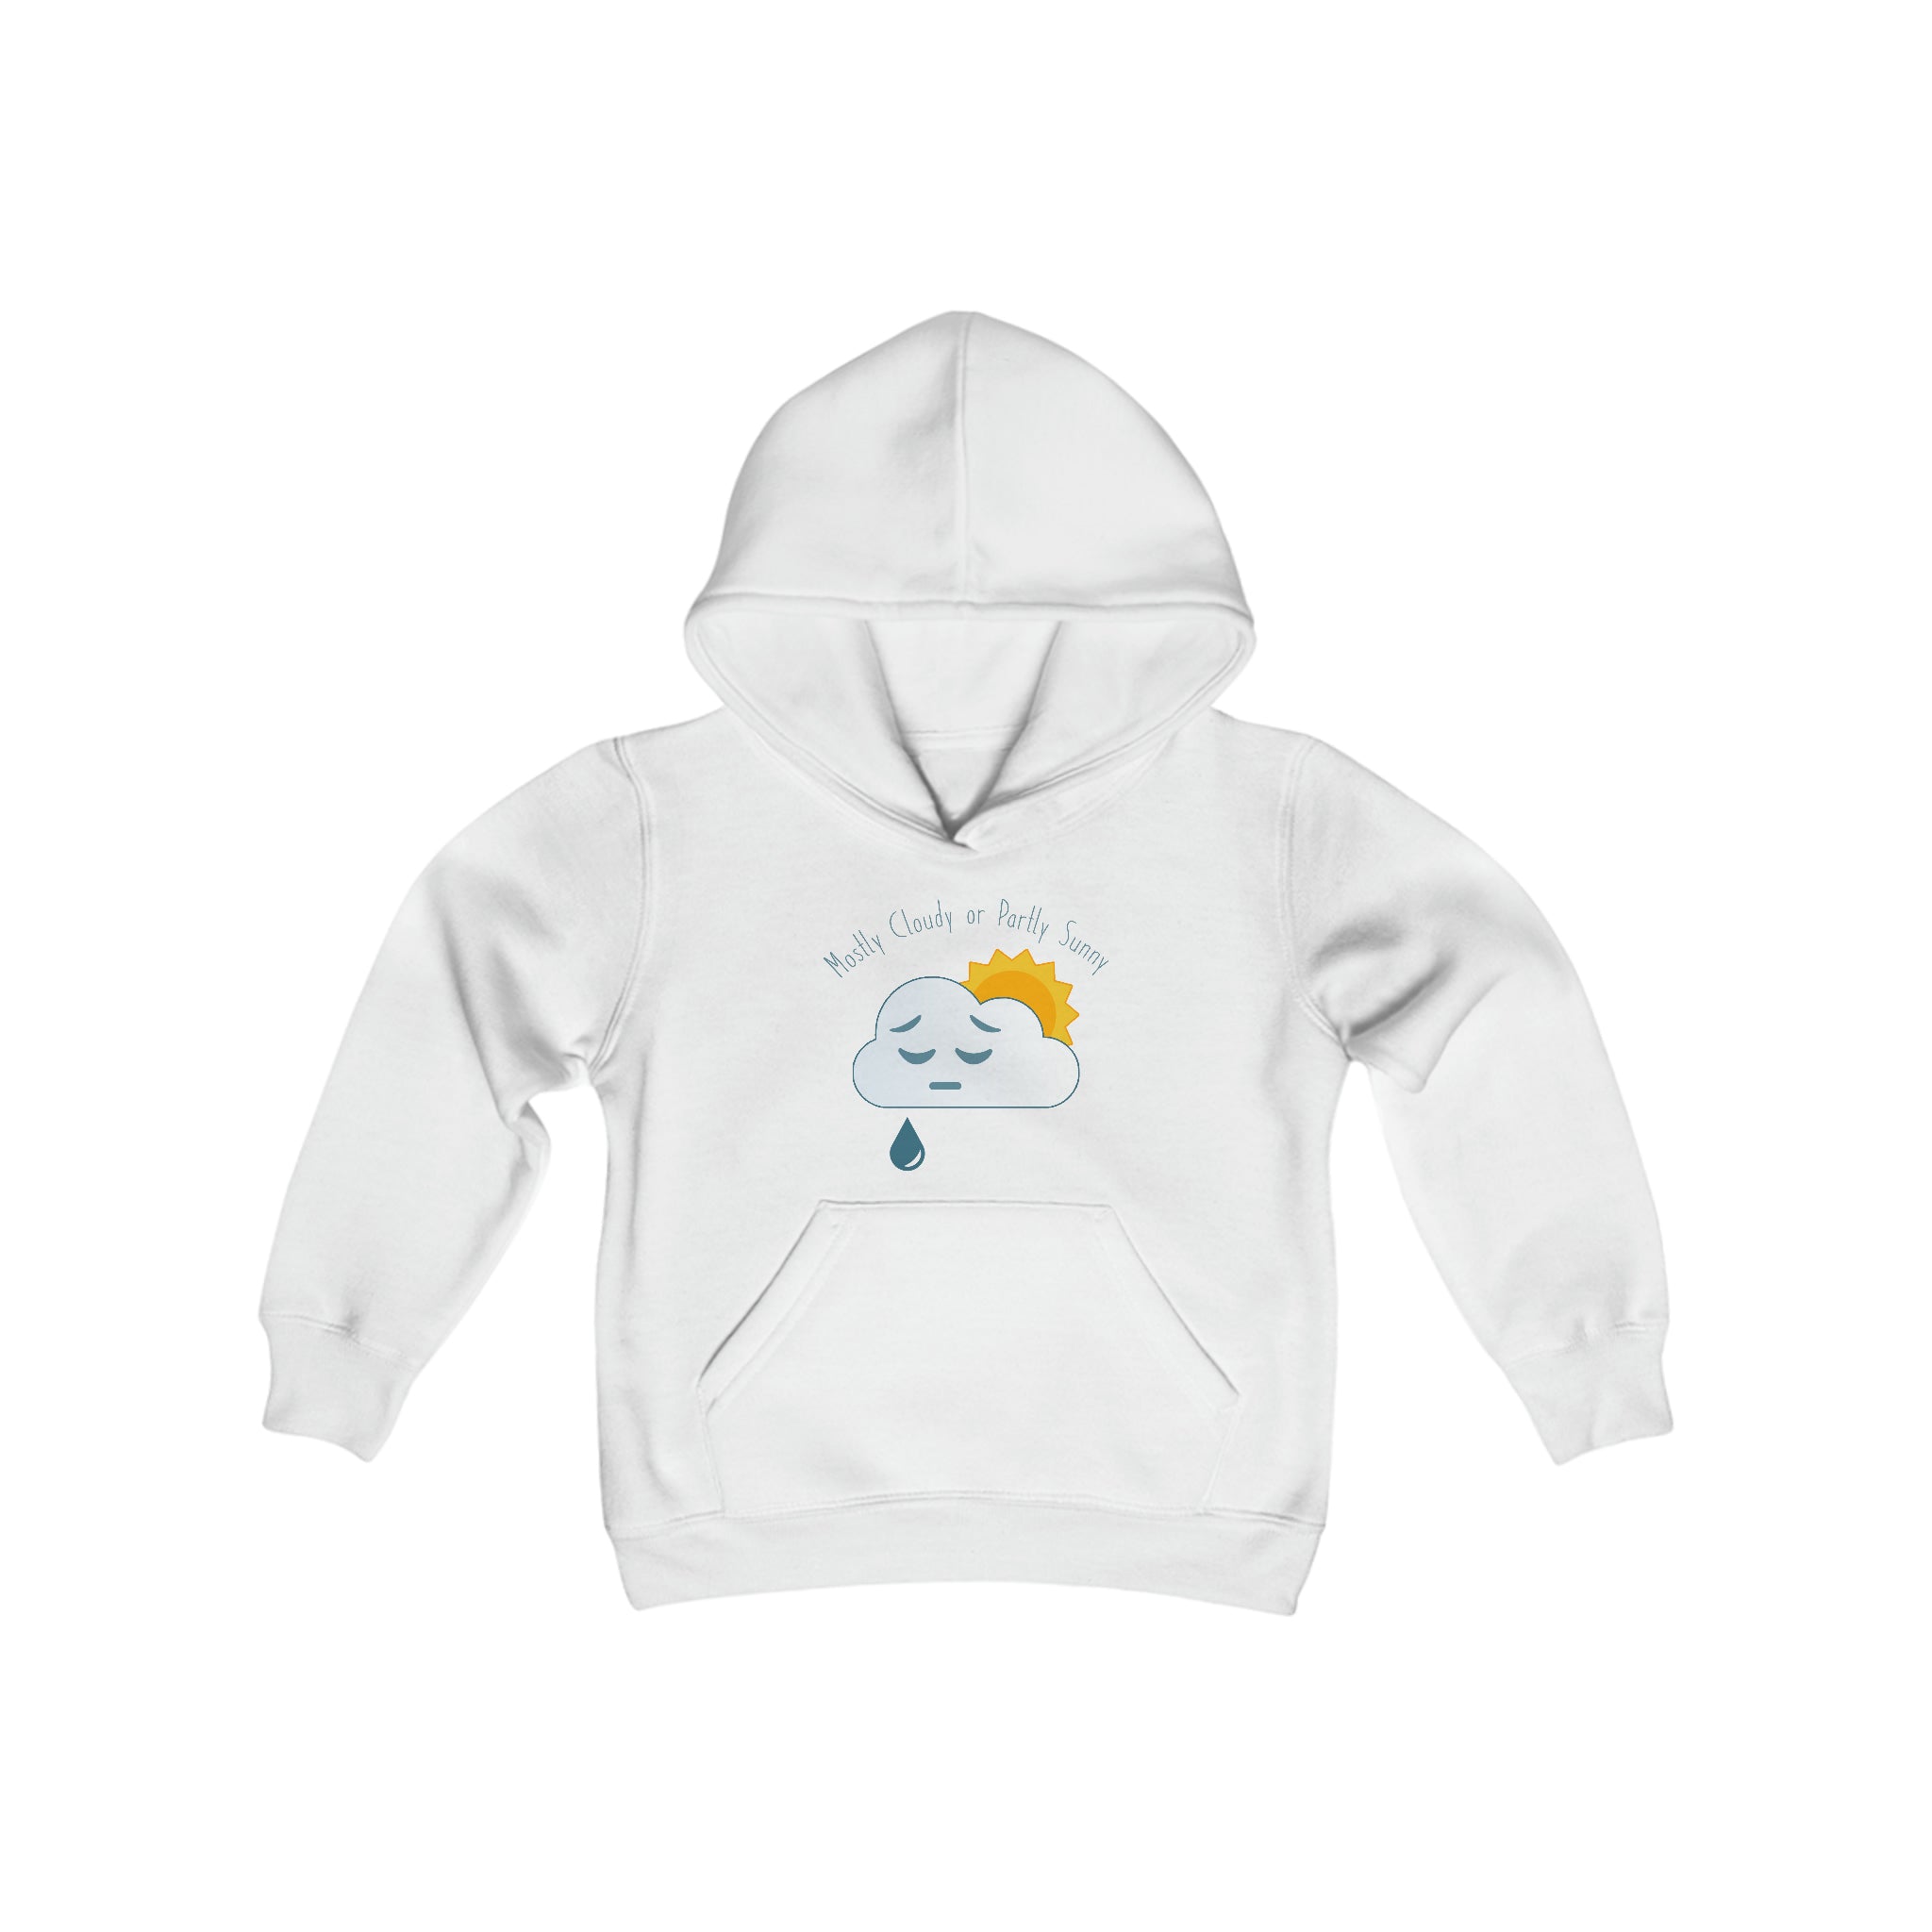 Mostly Cloudy Children's Hoodie 